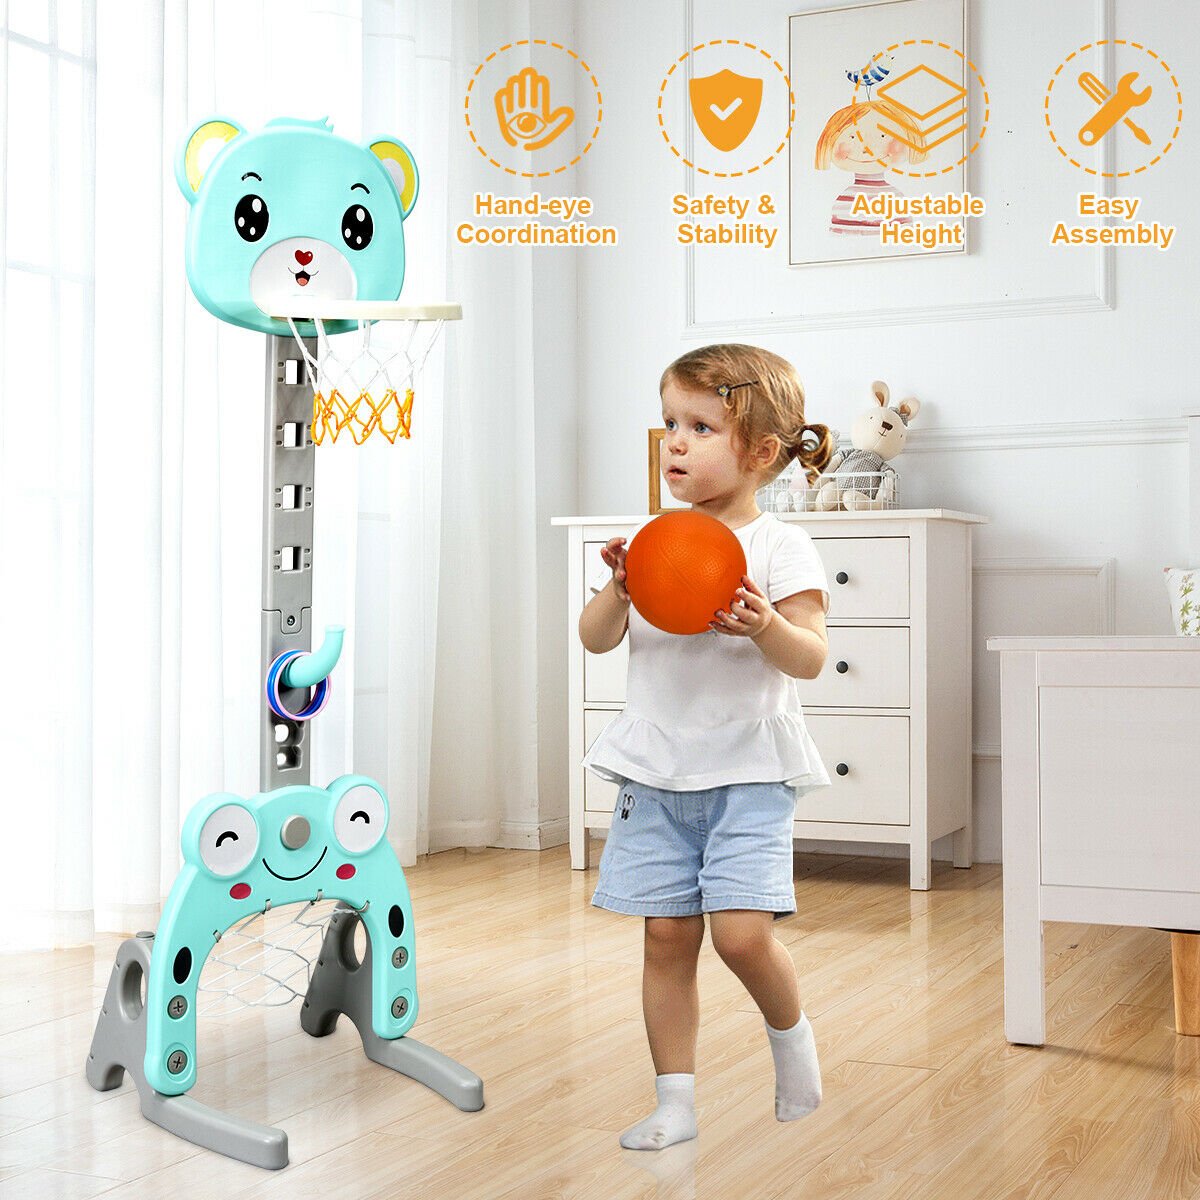 Adjustable Kids 3-in-1 Basketball Hoop Set Stand with Balls, Green